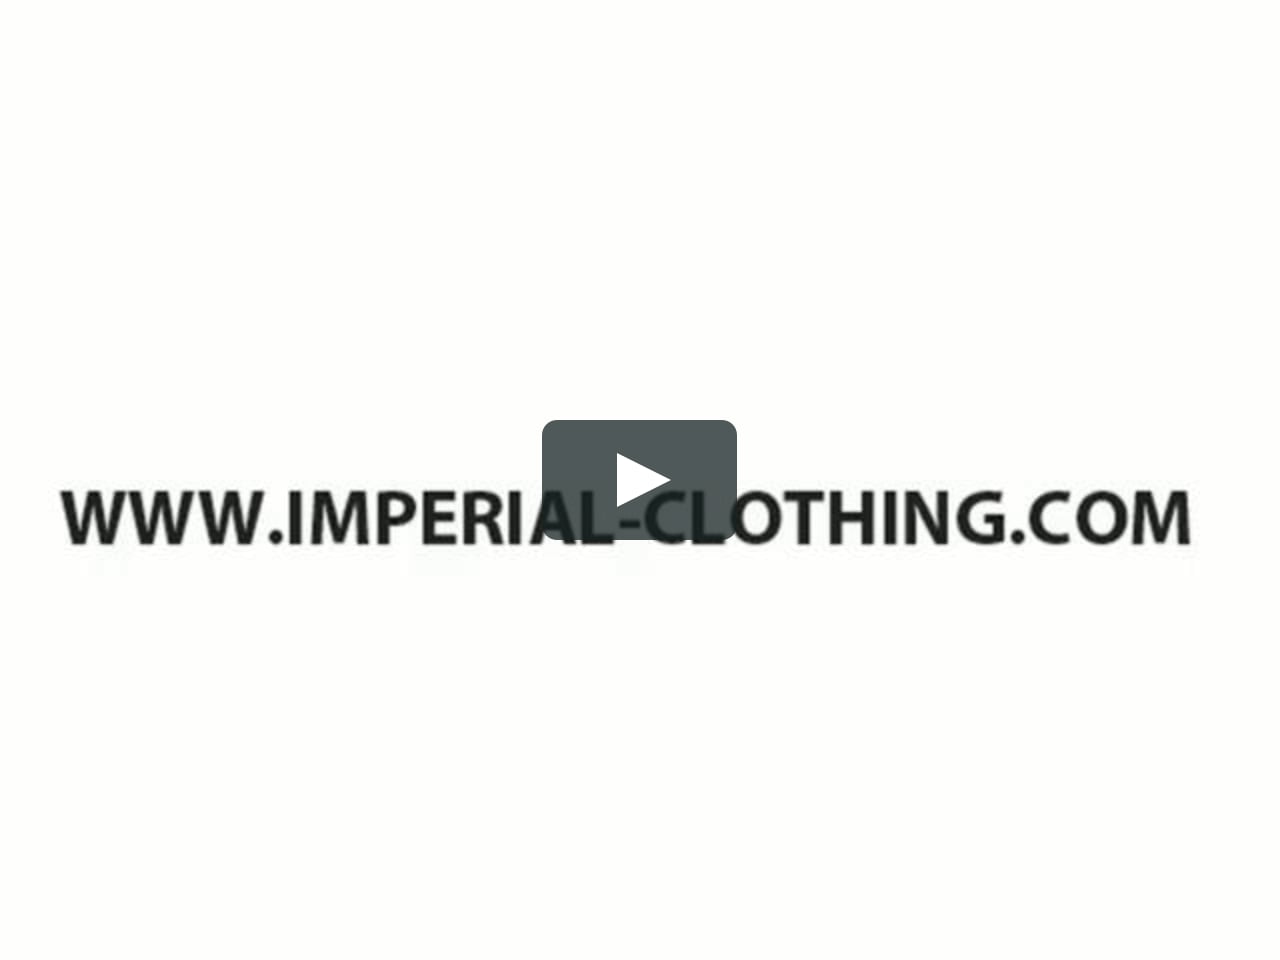 Imperial Clothing Logo - Imperial Clothing - Behind The Scenes - Part: 1 on Vimeo